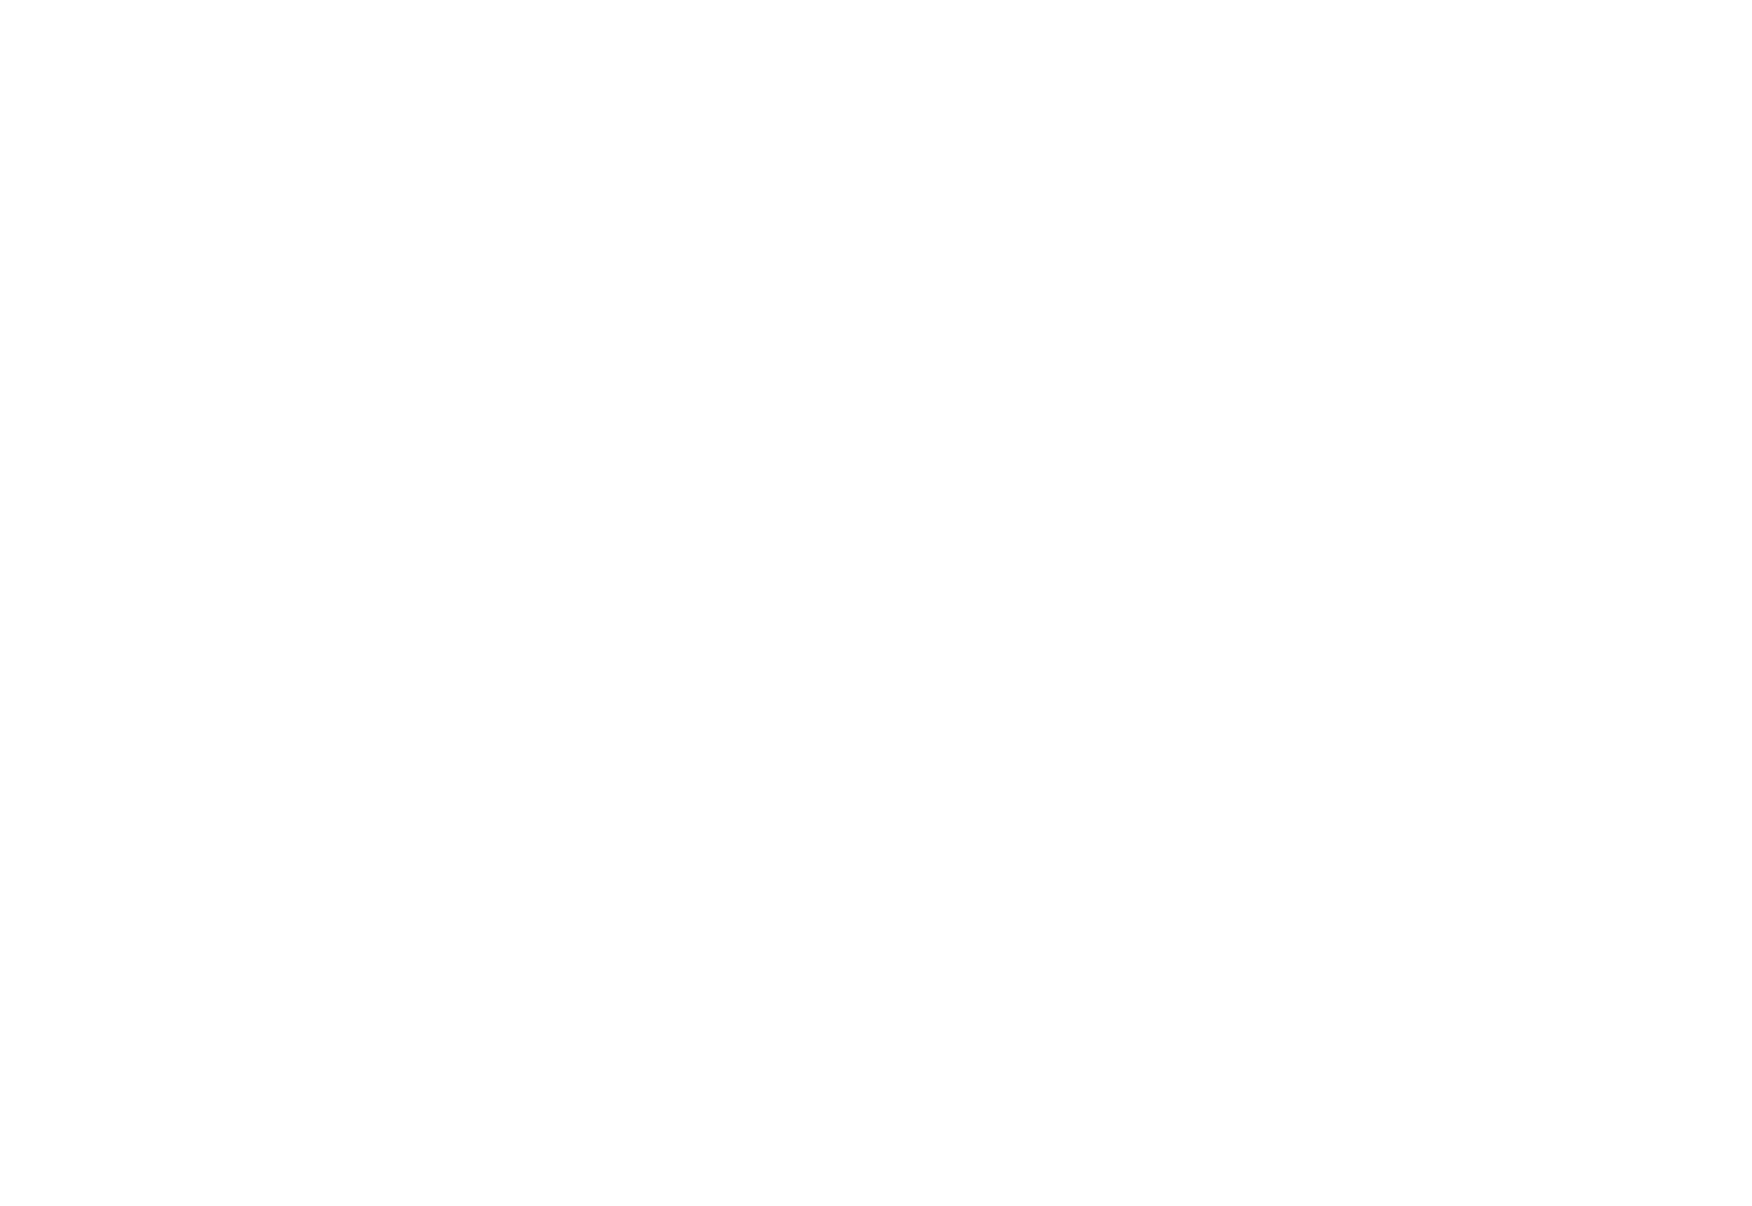 Our Kind of Traitor logo